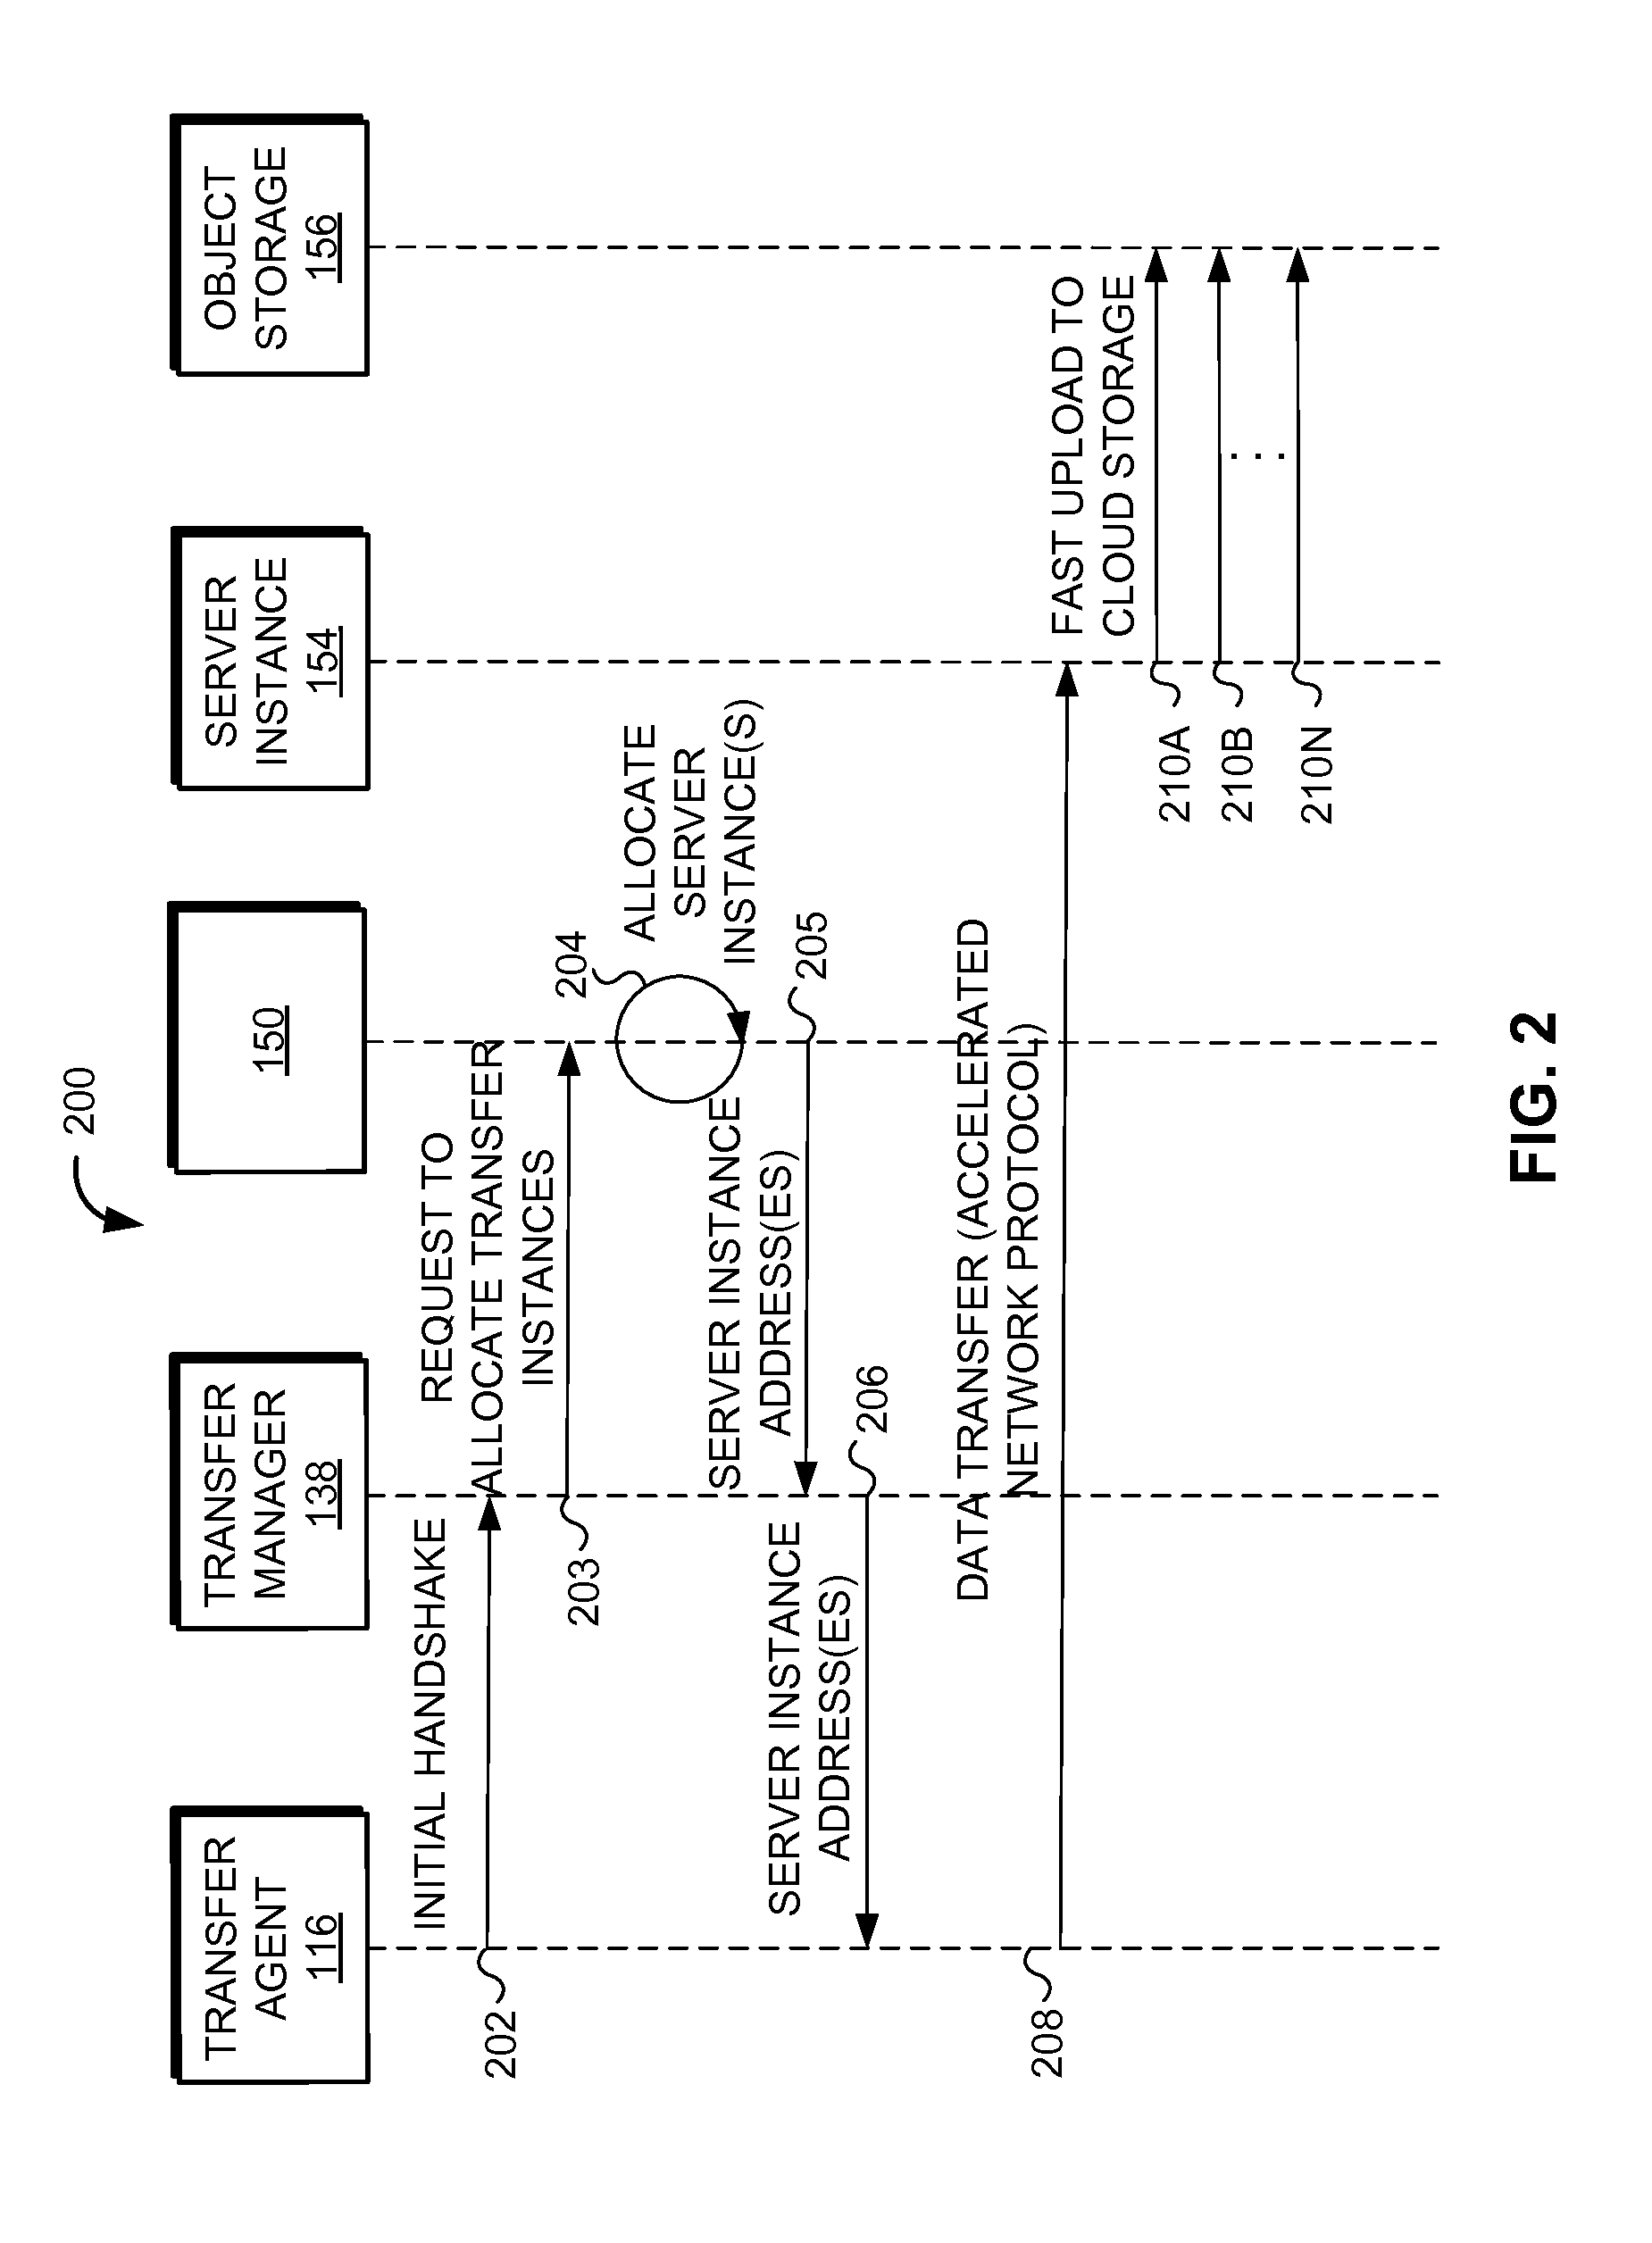 System and method for load balancing cloud-based accelerated transfer servers